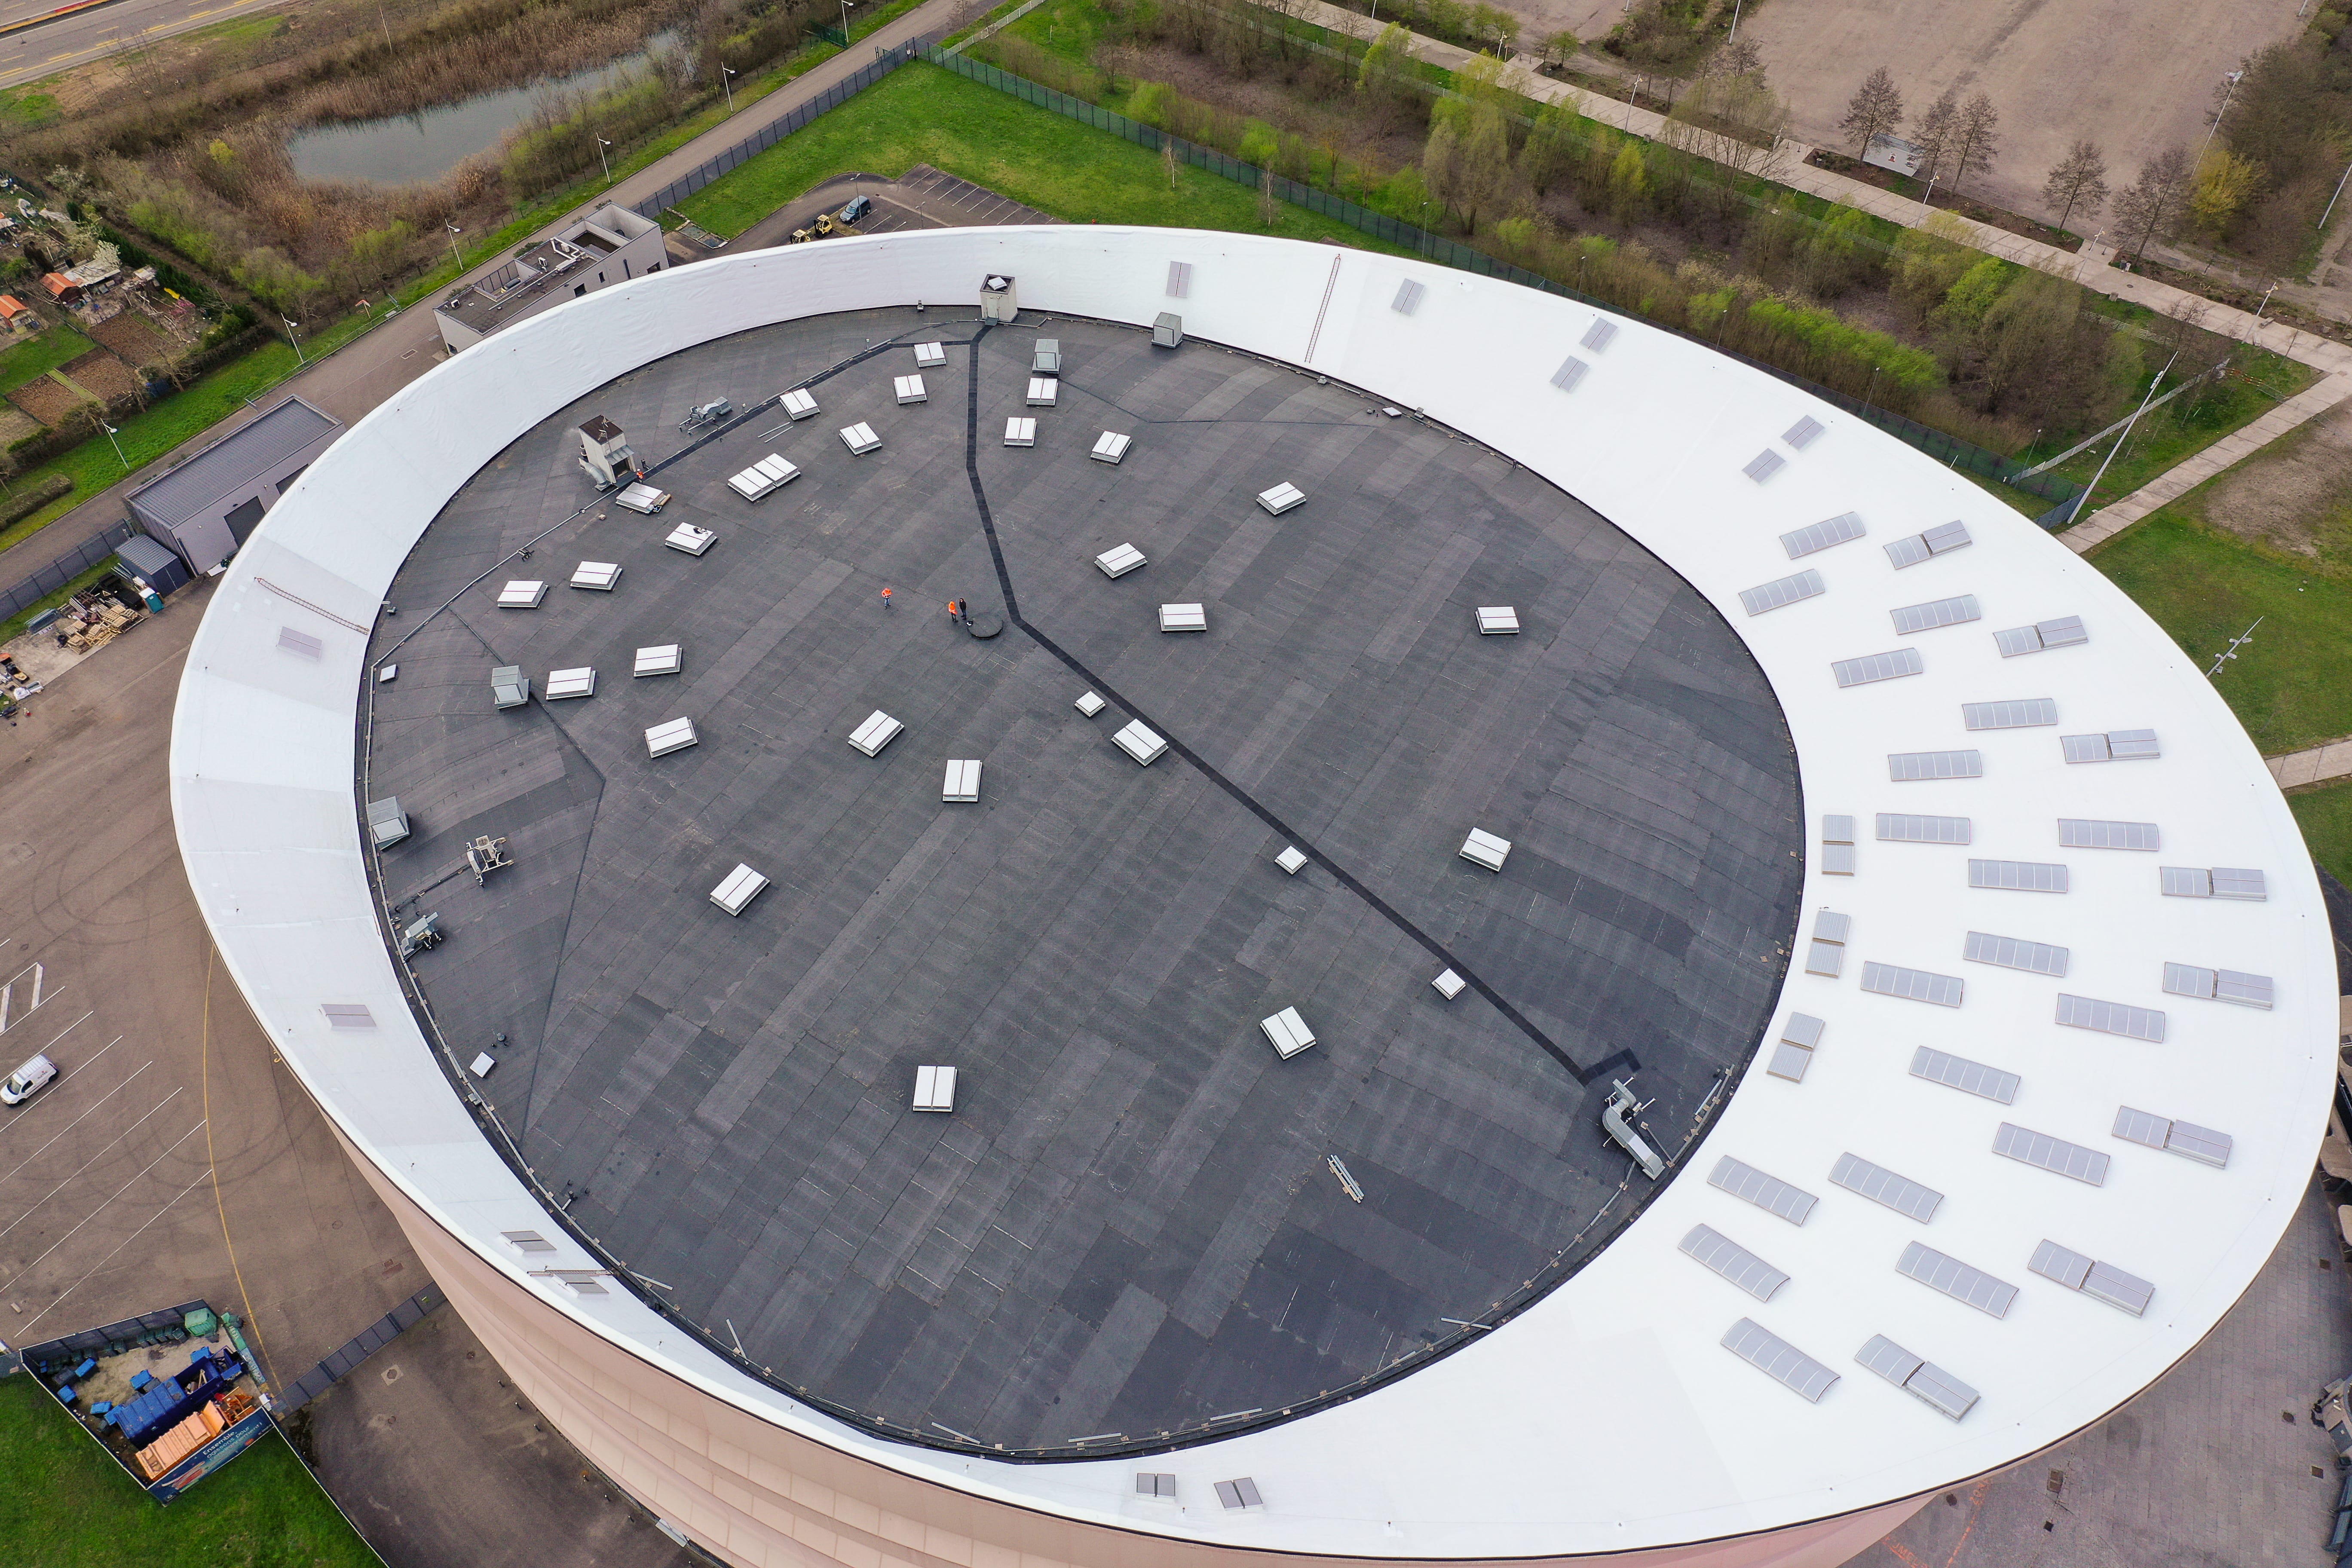 Roof of the Zenith in Strasbourg in France waterproofed with the Elevate RubberGard EPDM and the UltraPly TPO membranes